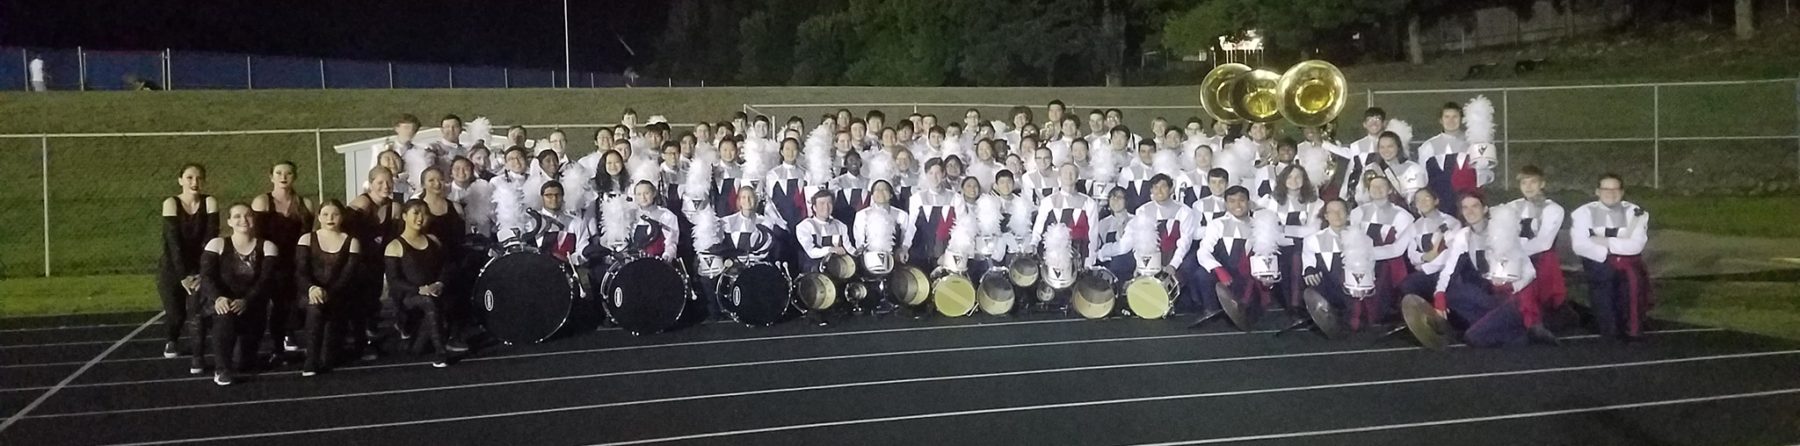 WESTVIEW HIGH SCHOOL BAND & AUXILIARY